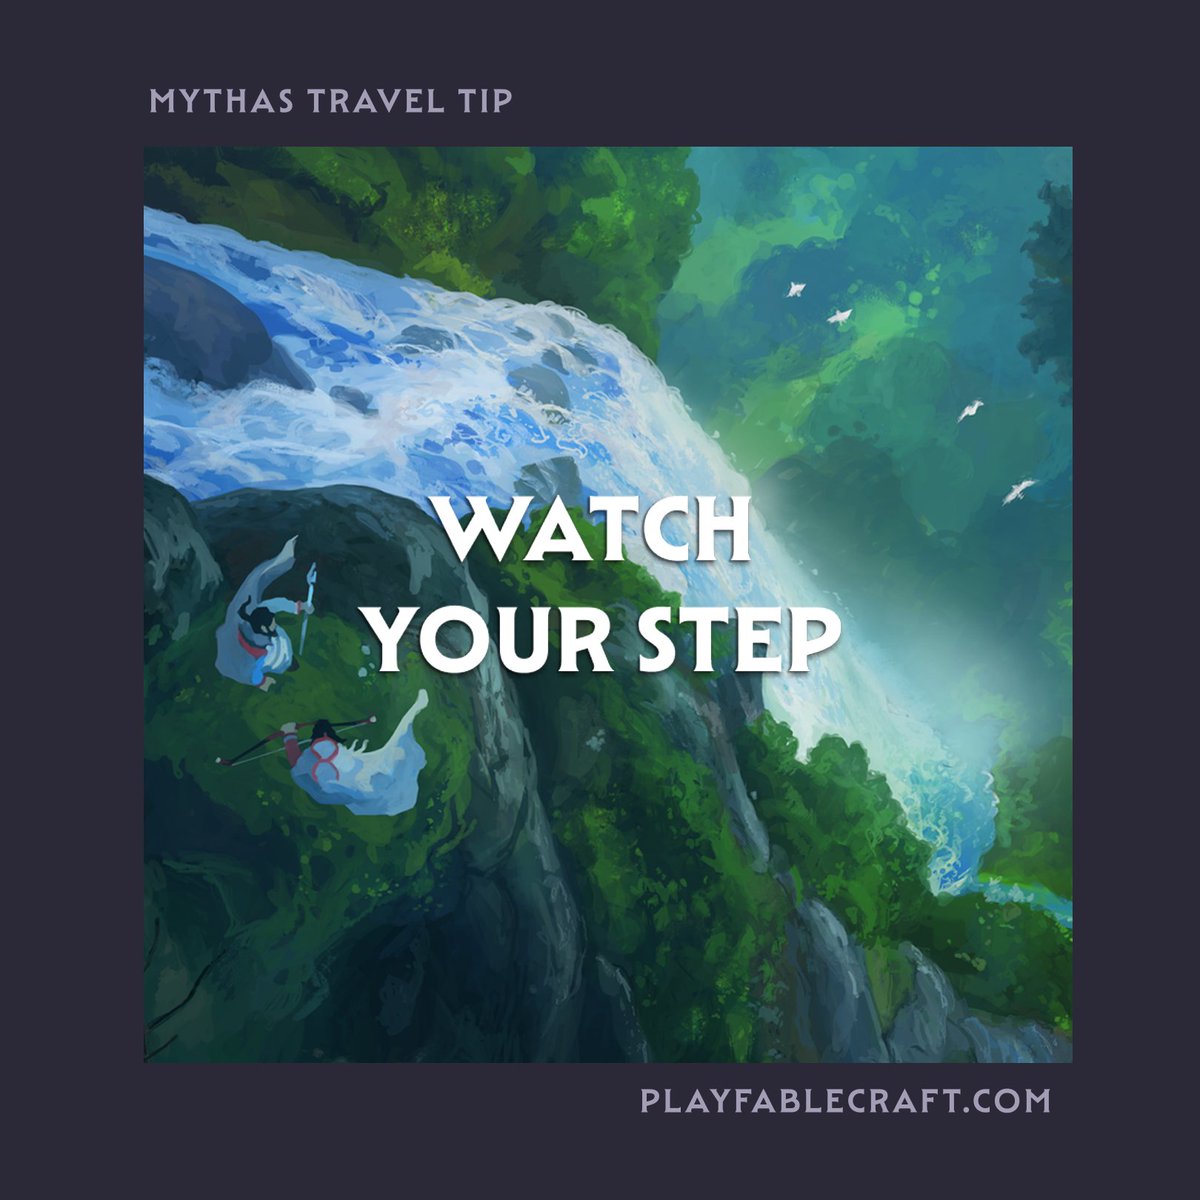 The views of Mythas may be stunning at times, but watch your feet all the same! 👀

Stray too far from the path and there's no telling where you'll get swept off to.

#TravelTipTuesday